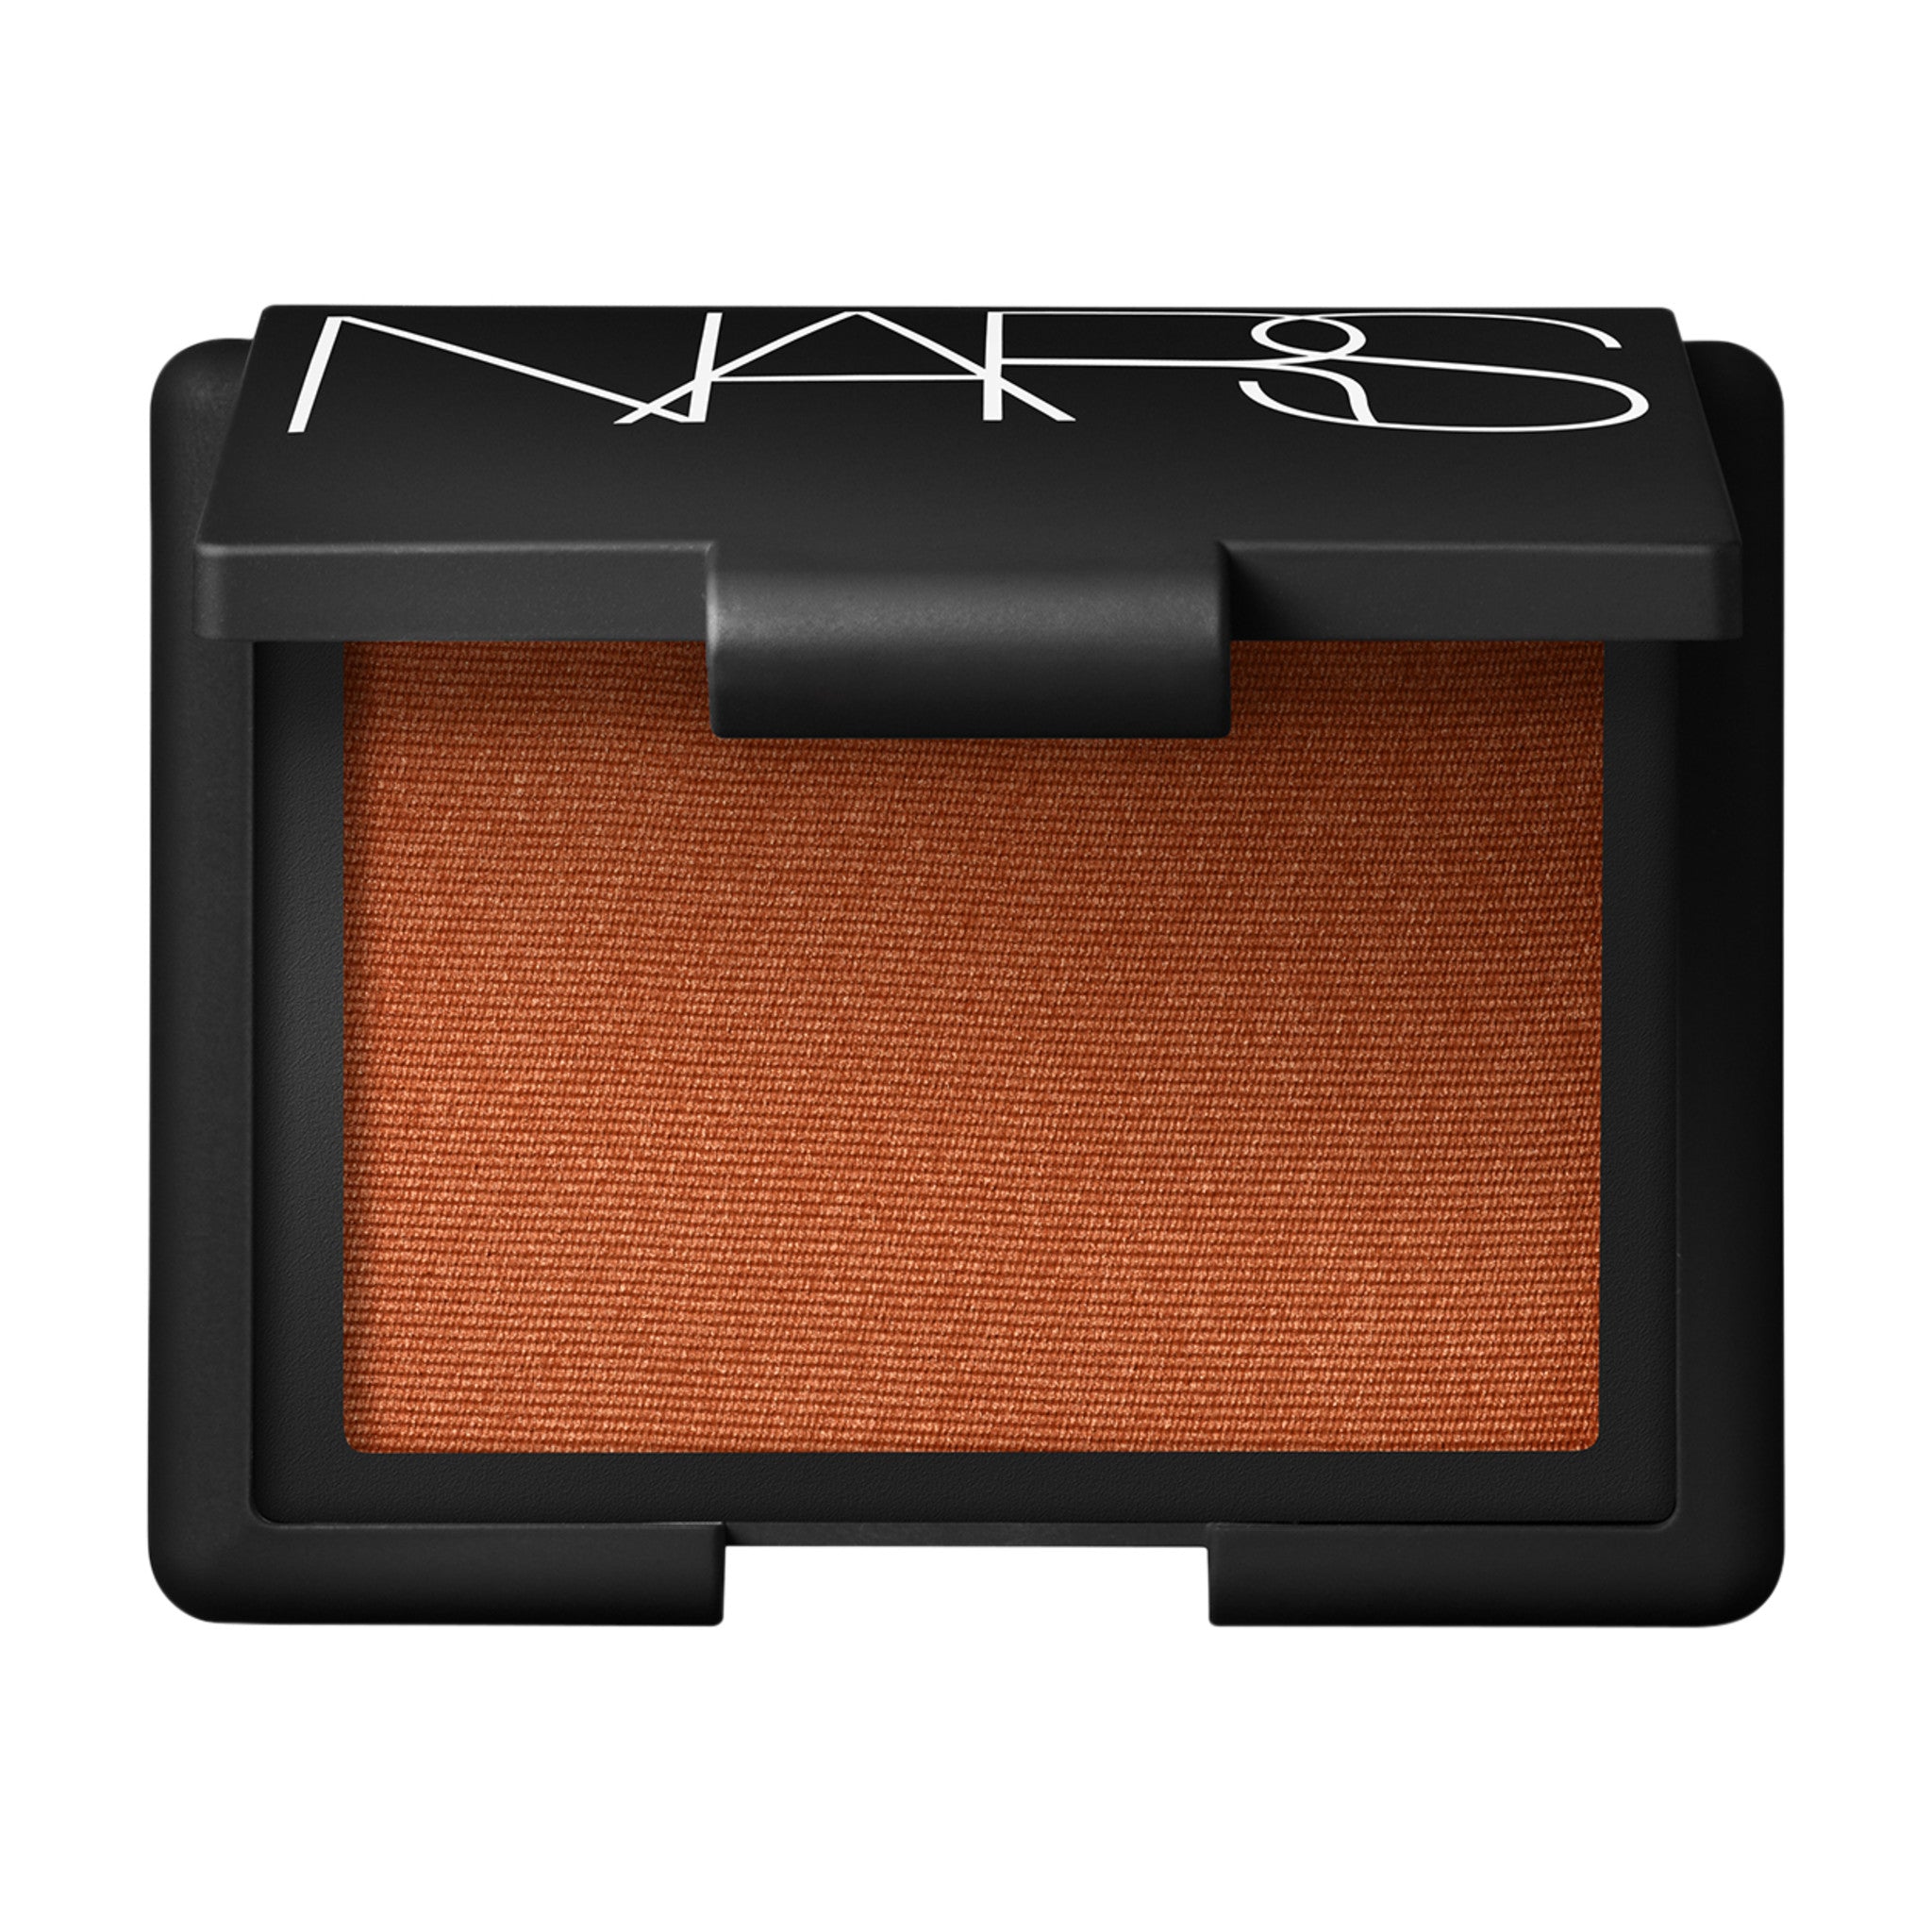 Nars Blush Color/Shade variant: Taj Mahal main image. This product is in the color pink